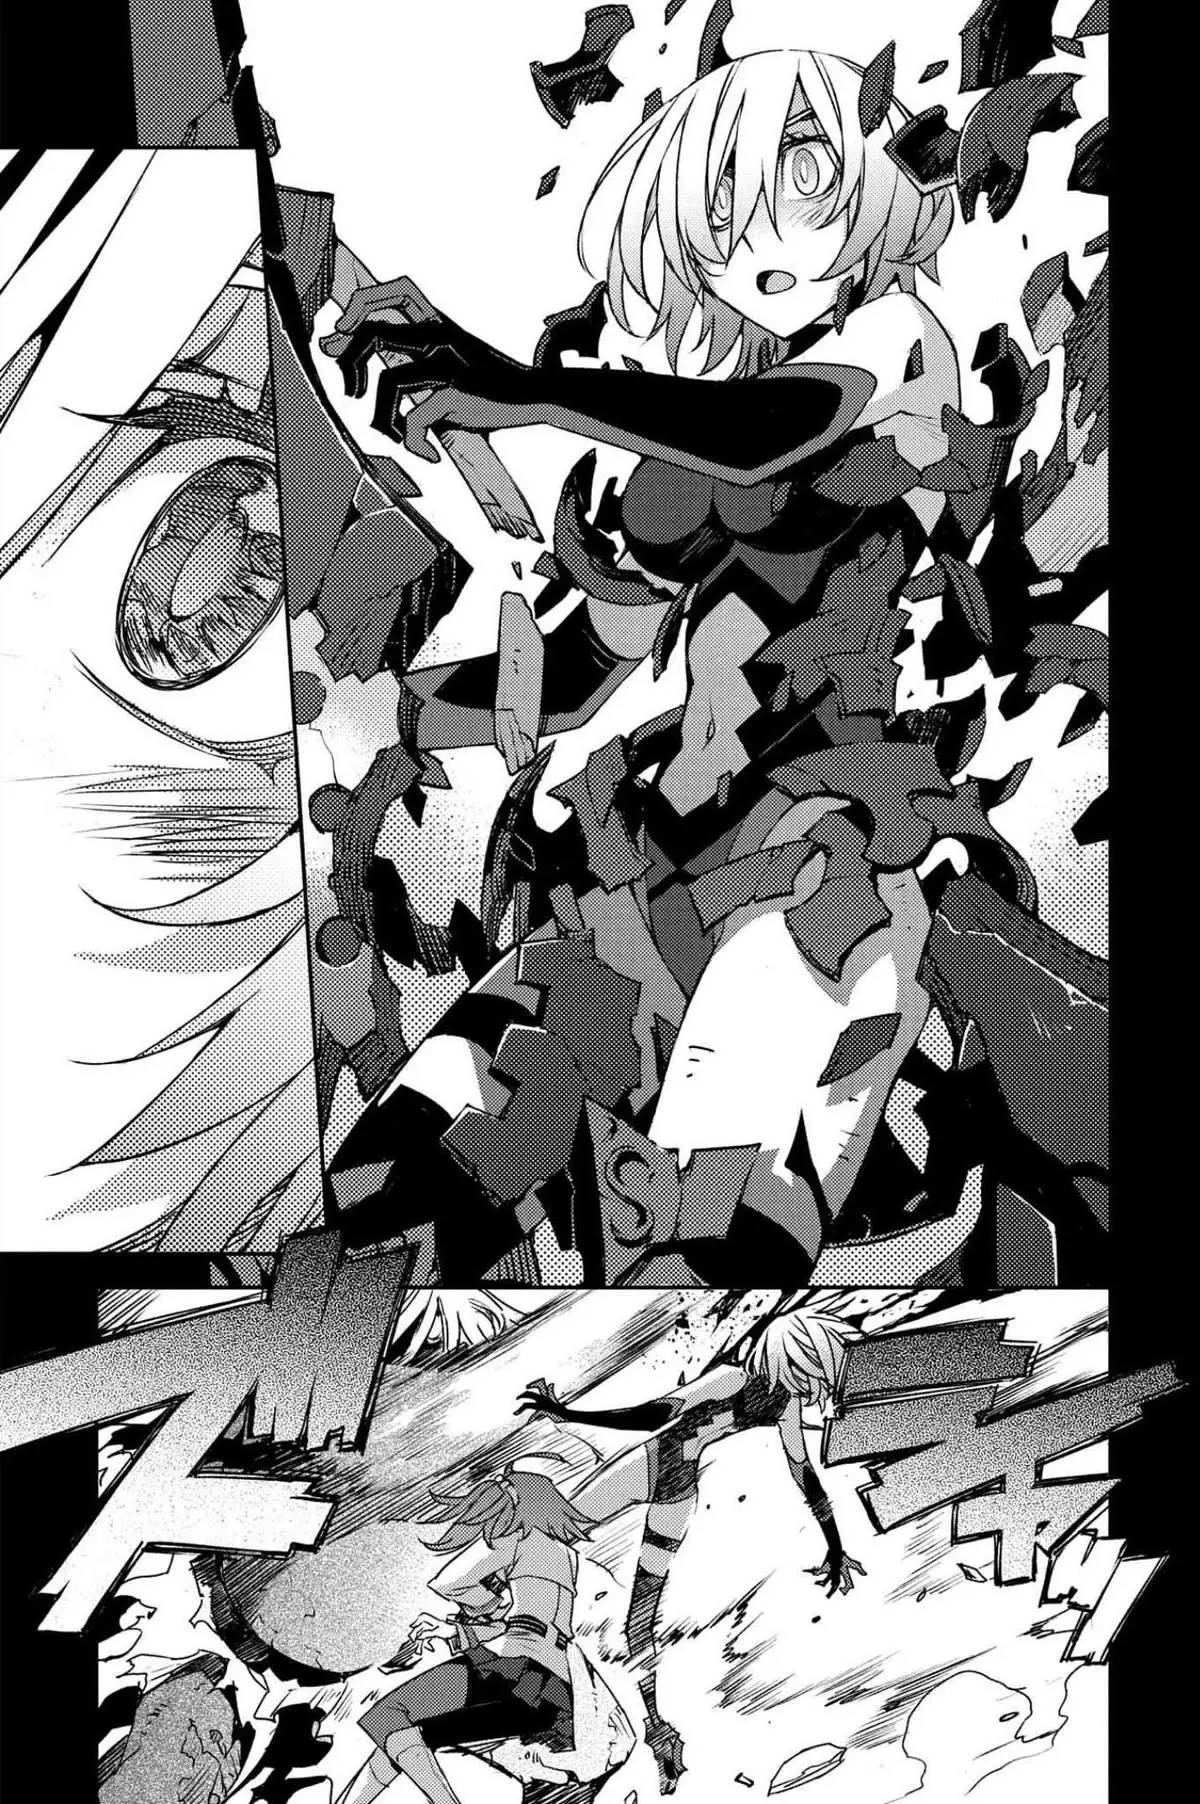 Fate/grand Order: Epic Of Remnant - Subspecies Singularity Iv: Taboo Advent Salem: Salem Of Heresy - 26 page 3-de7d0732